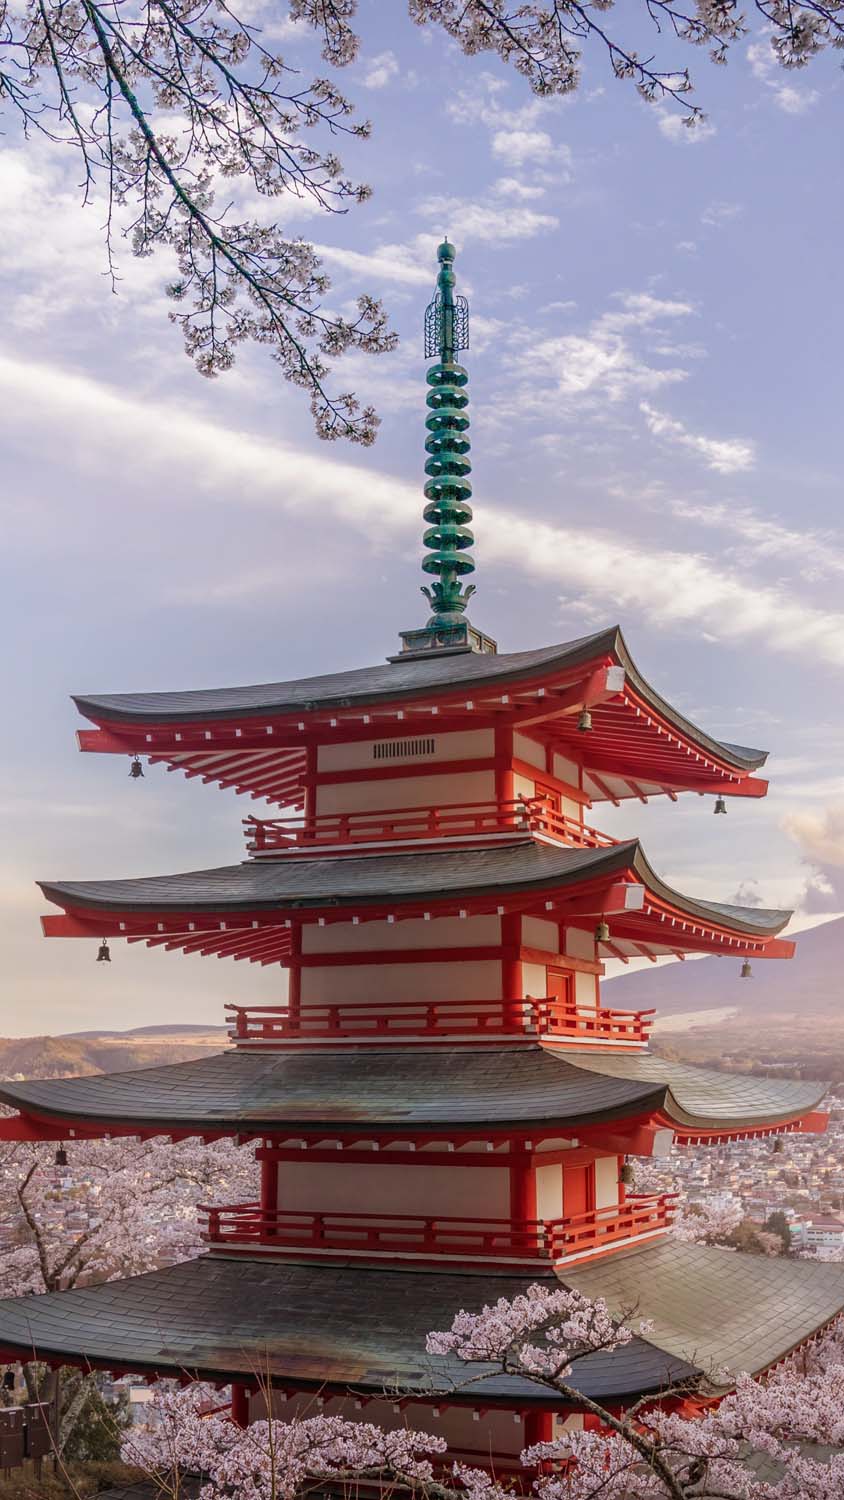 Japan Temple IPhone Wallpaper HD - IPhone Wallpapers : iPhone Wallpapers